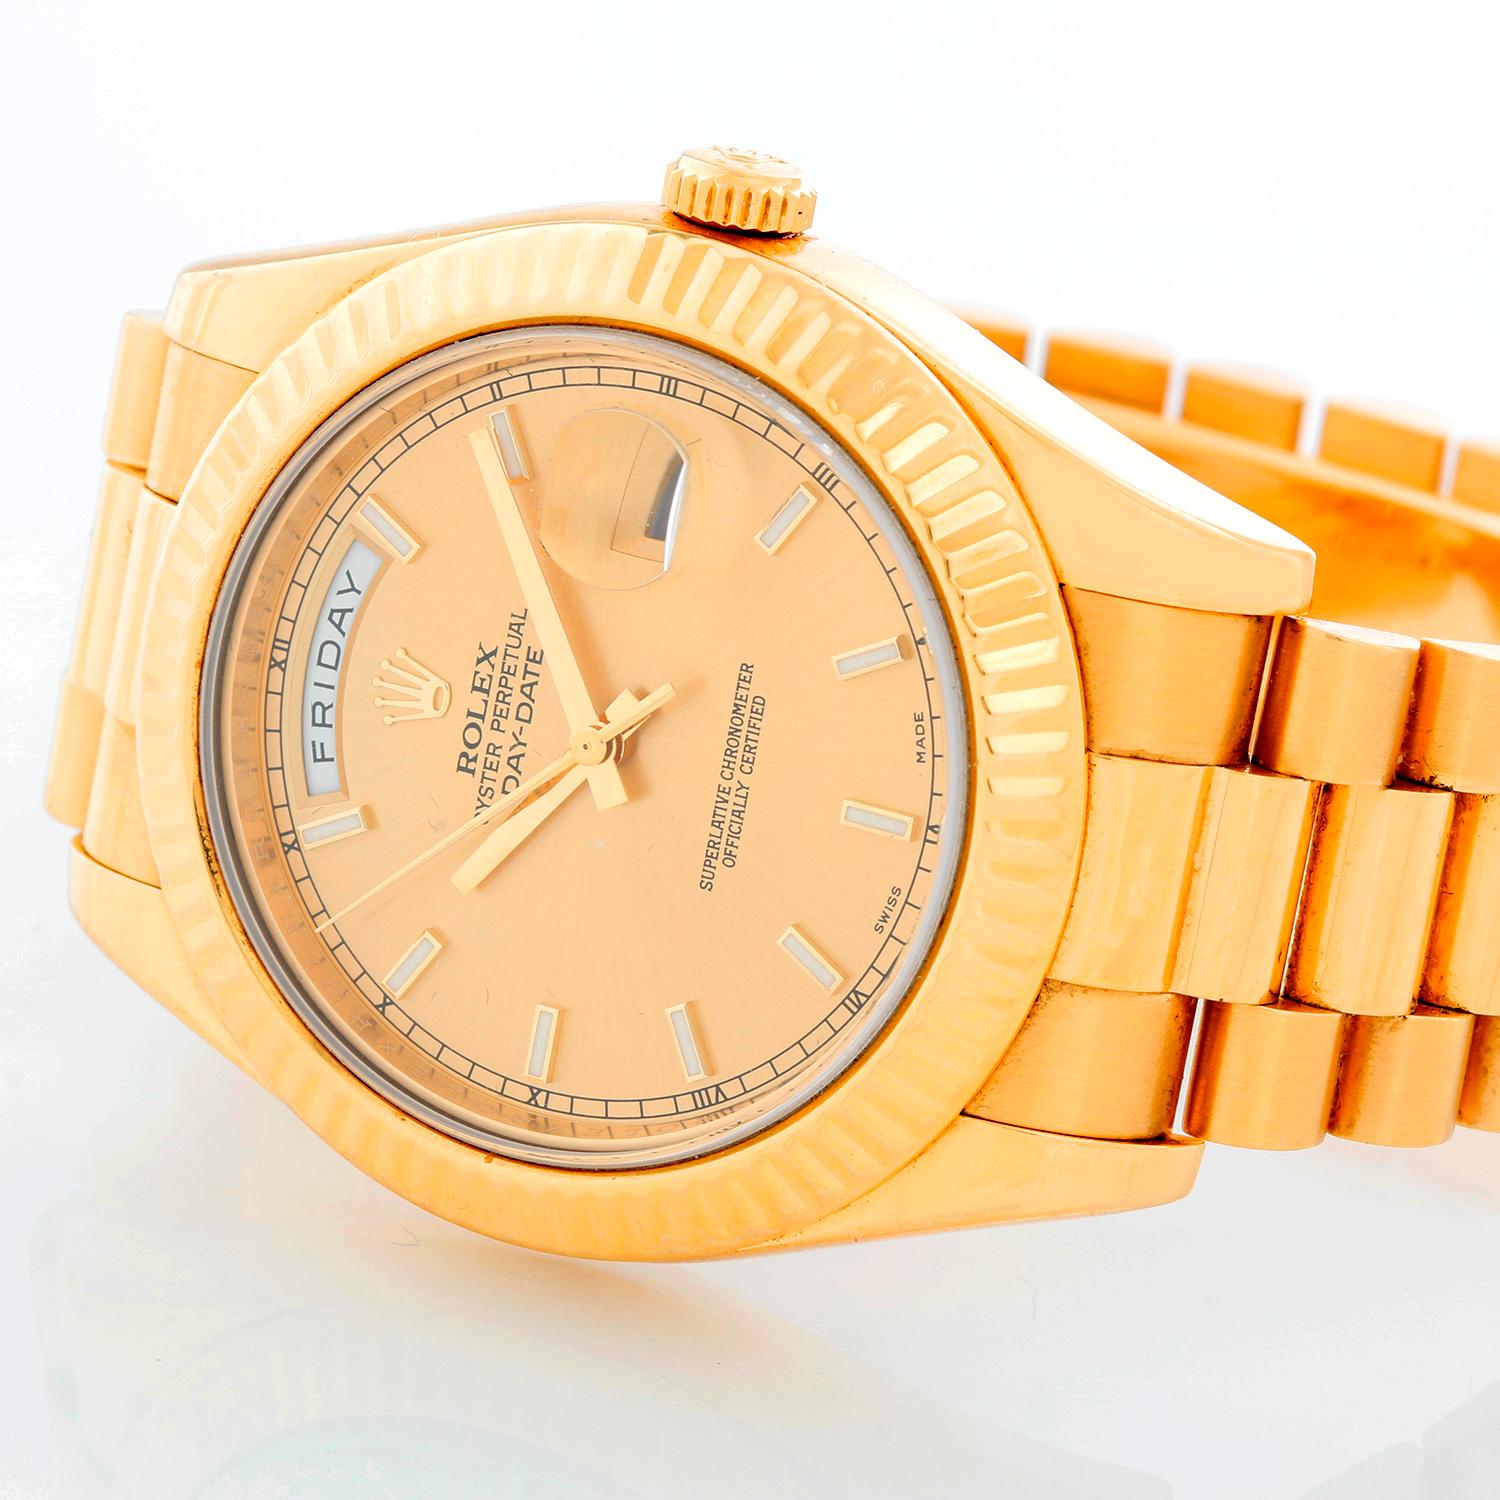 Rolex Day-Date II President 18k Yellow Gold Men's 41mm Watch 218238 - Automatic winding, 31 jewels, sapphire crystal, with day and date. 18k yellow gold case with fluted bezel (41mm diameter). Champagne dial with gold stick hour markers. 18k yellow